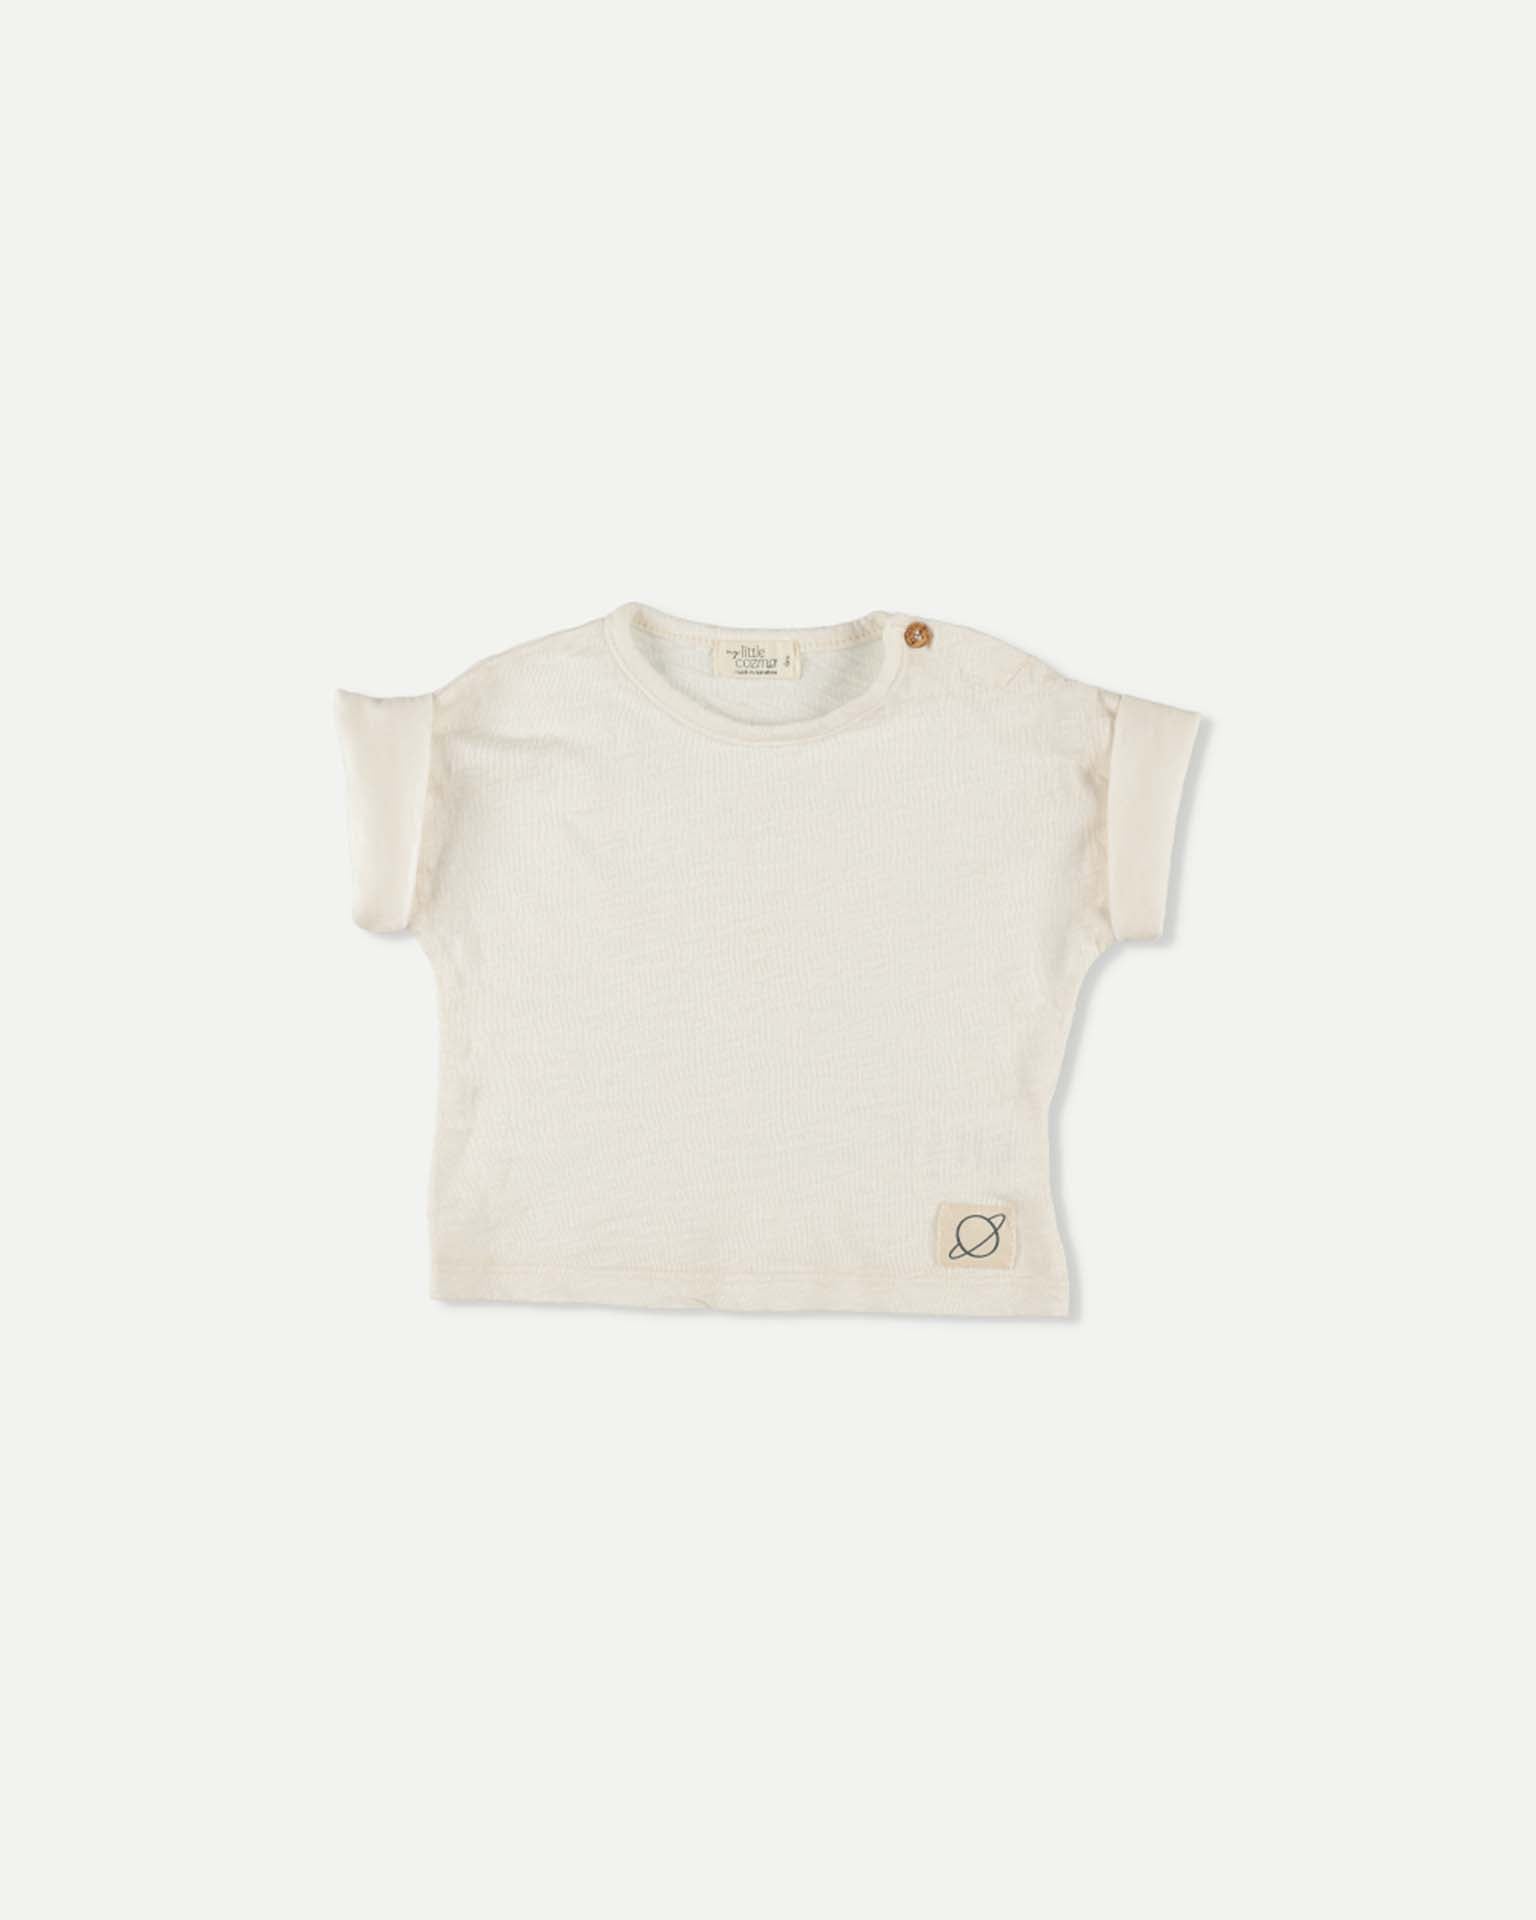 Little my little cozmo baby kit baby tee in ivory